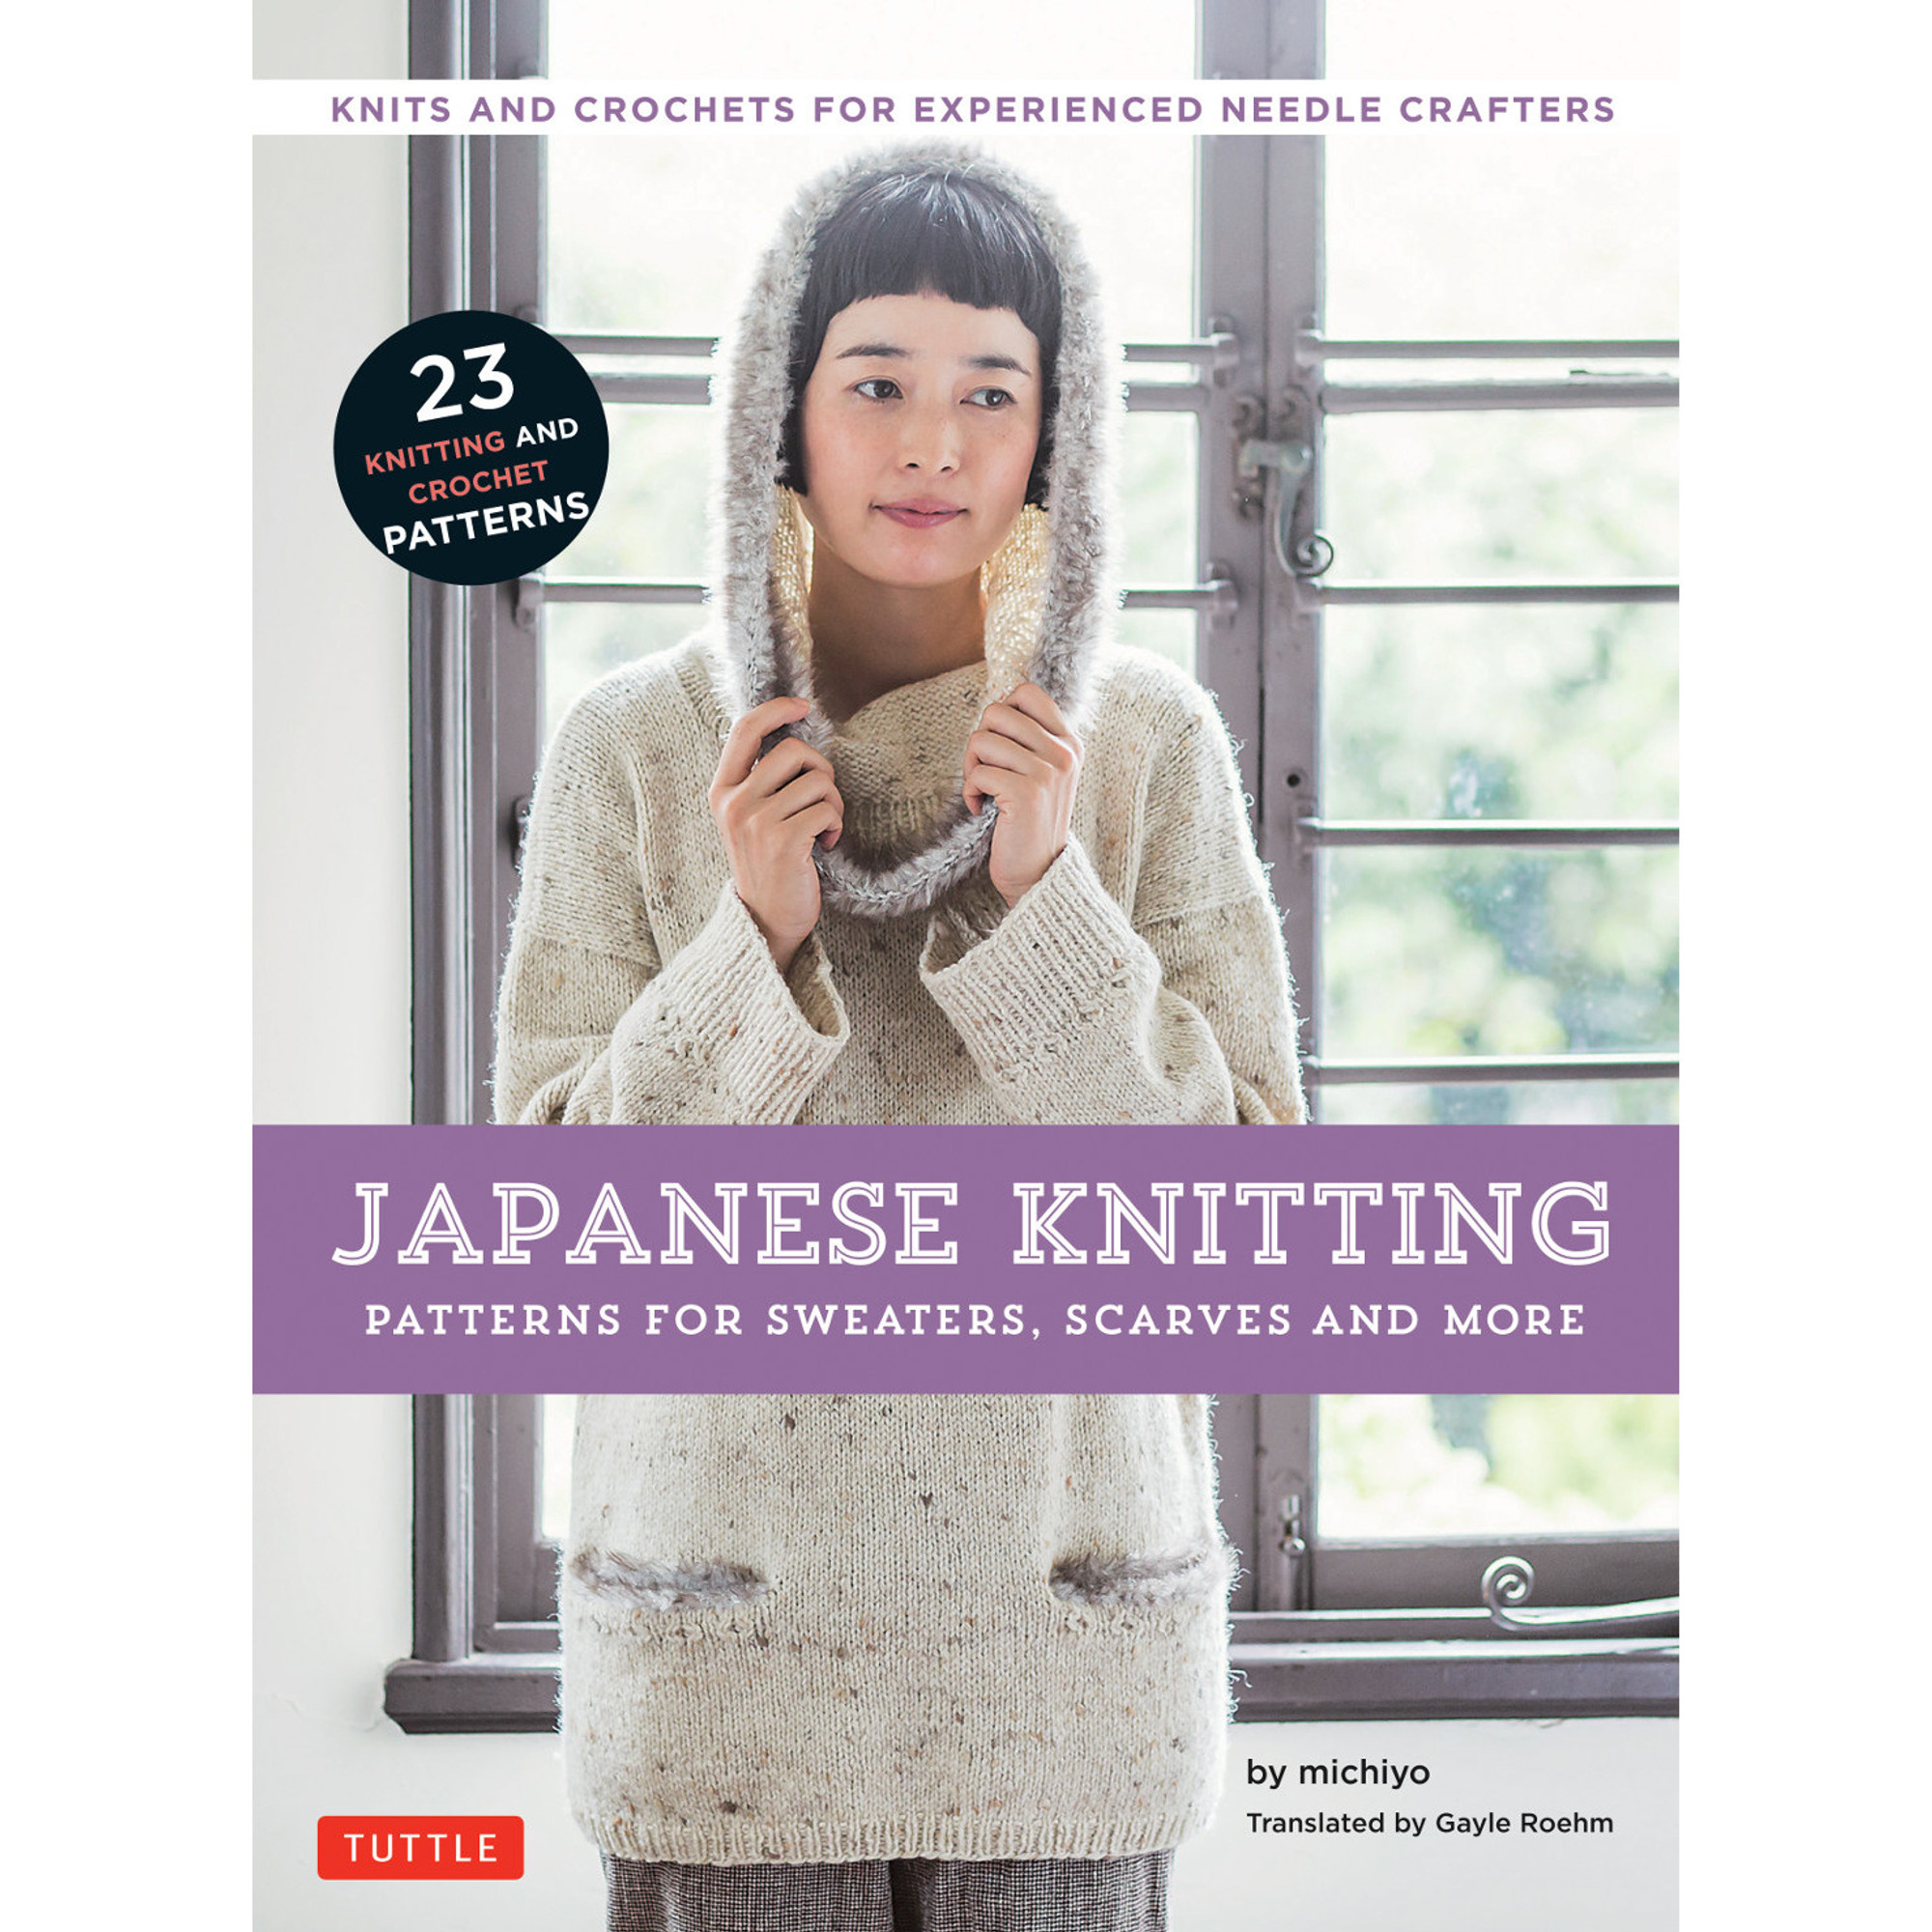 The Knitting Book: Over 250 Step-by-Step Techniques